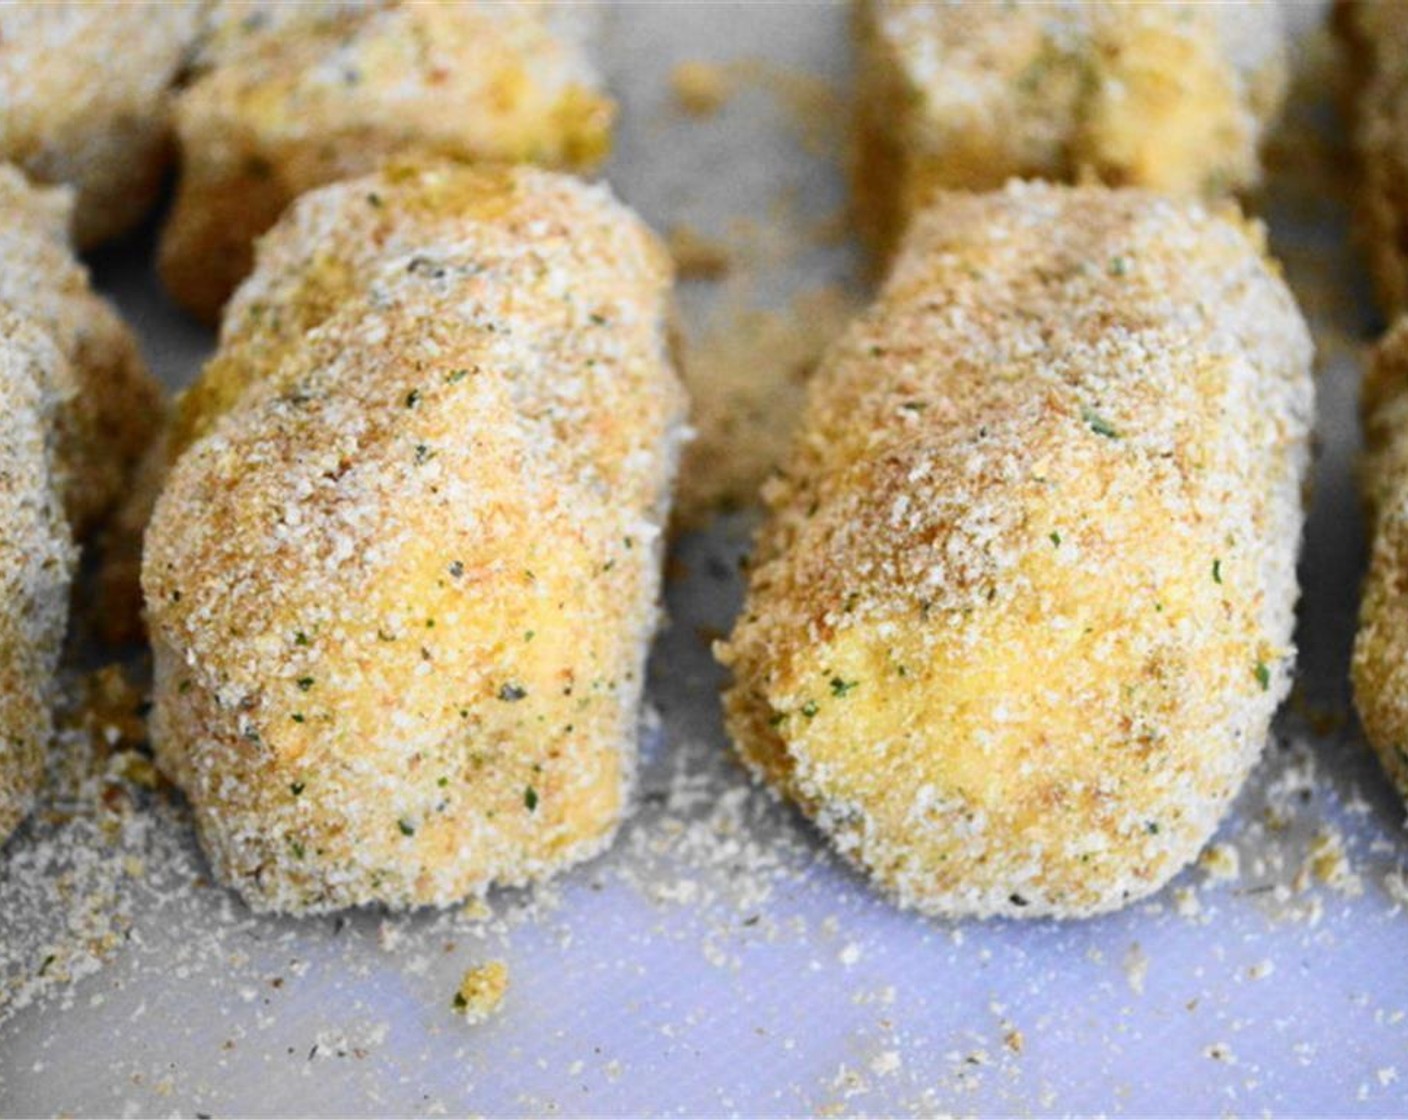 step 2 Use a large ice cream scoop to scoop out uniform portions of the batter and form them into croquettes. Dip each croquette in Egg (1) then coat in Seasoned Breadcrumbs (1/2 cup).